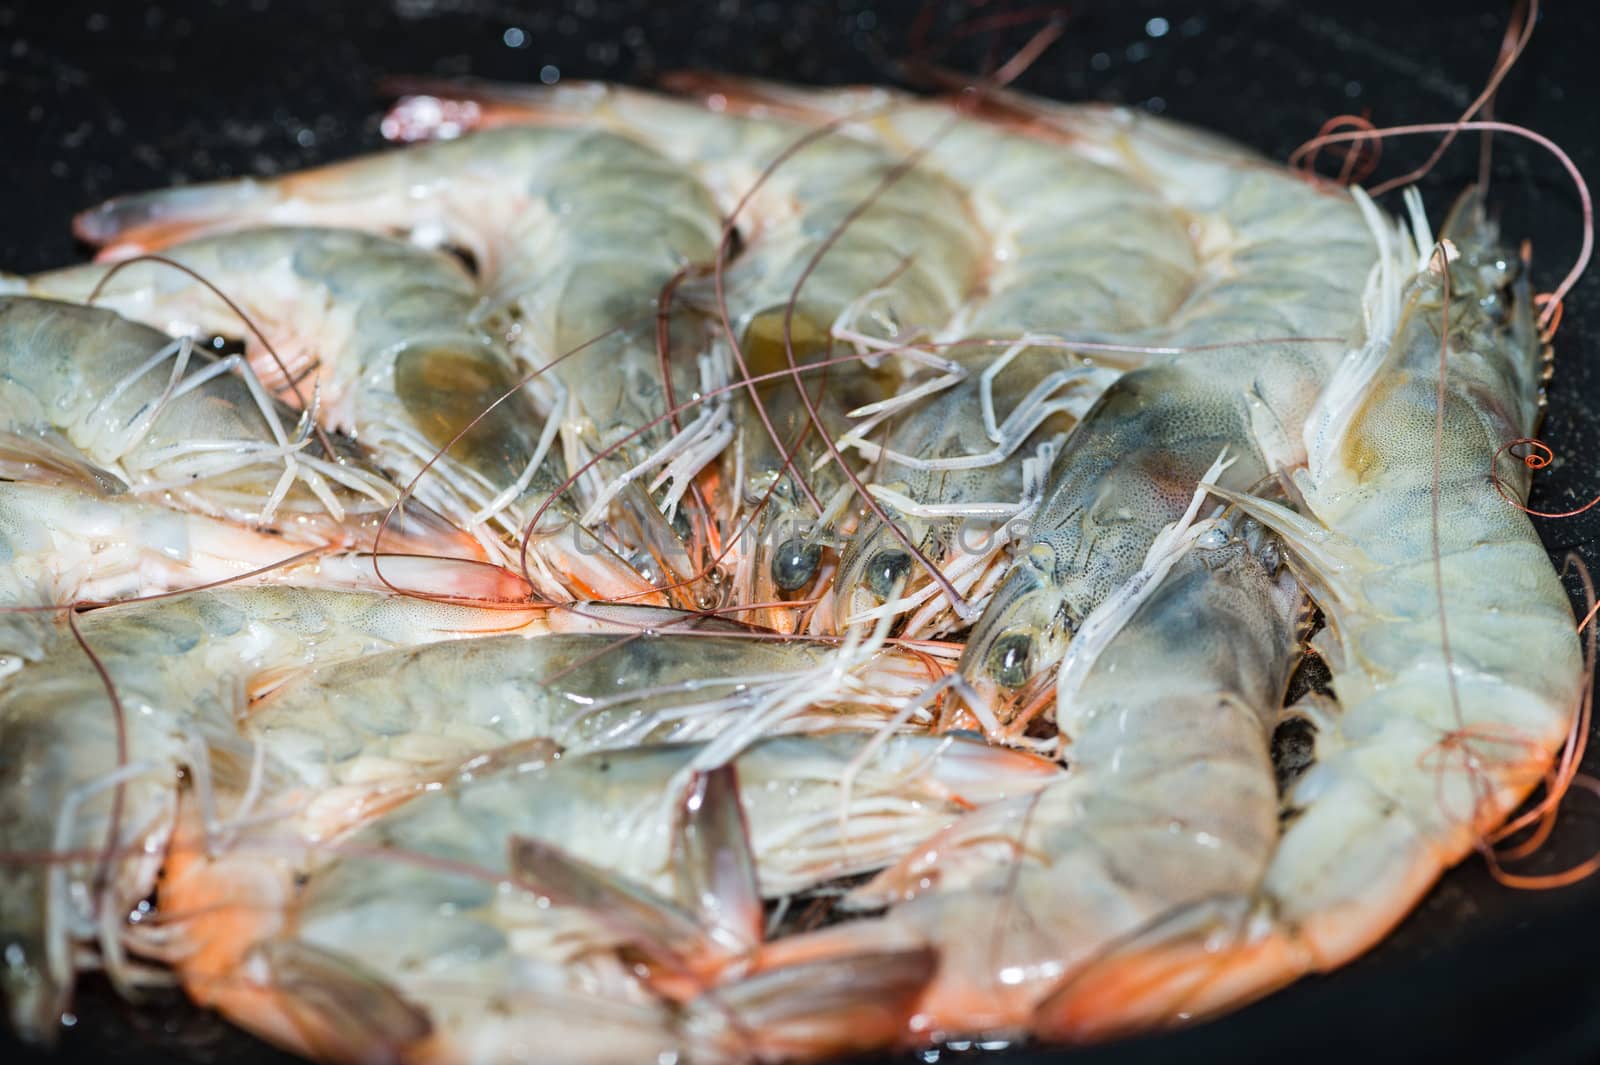 Raw shrimps are cooked on fry pan. Focus on shrimp's heads in the middle.